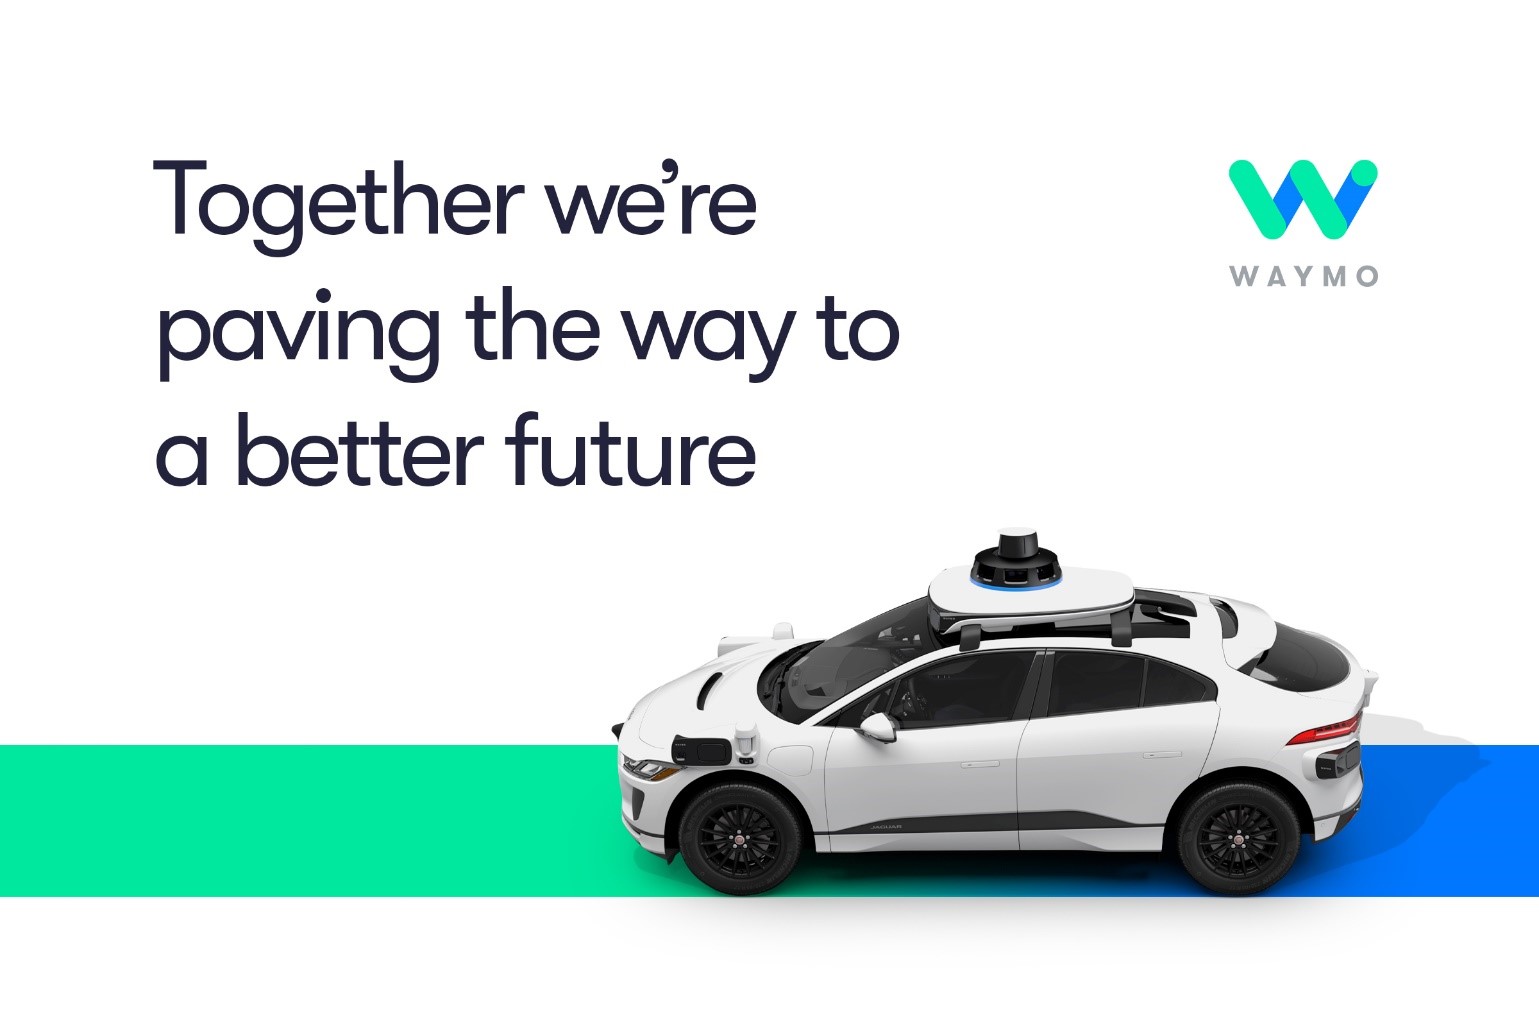 Together we’re paving the way to a better future. waymo.com